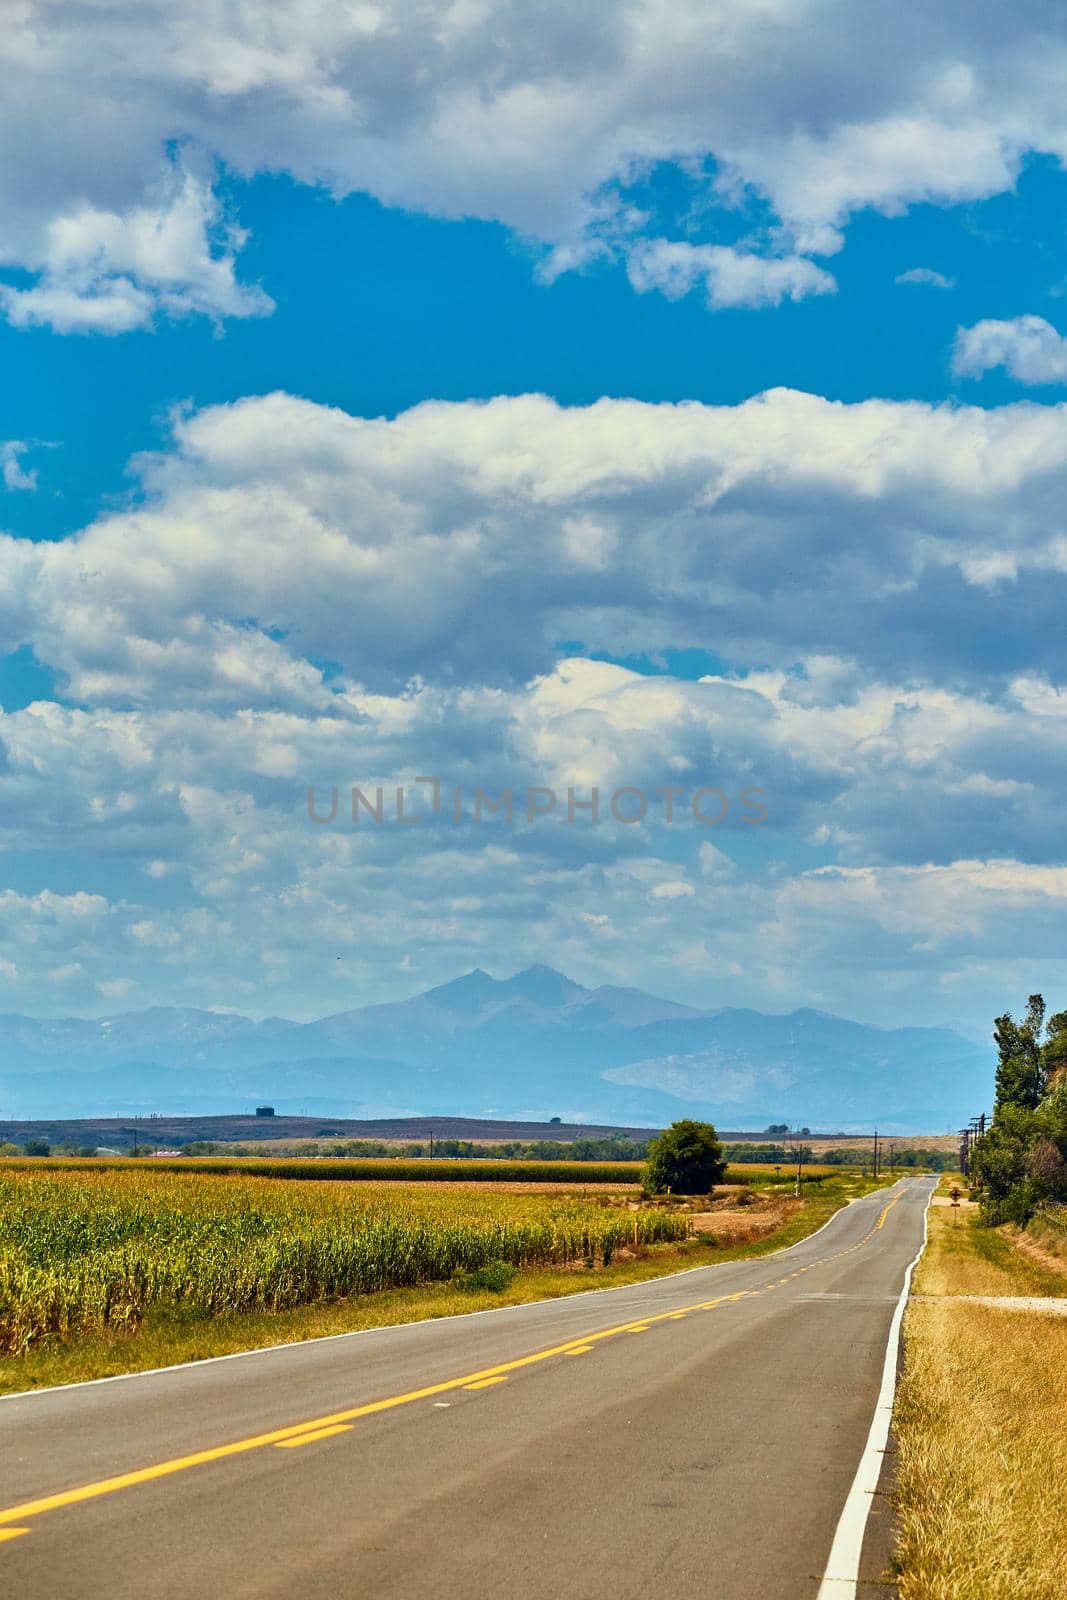 Road through the desert with mountains in the distance and white clouds by njproductions